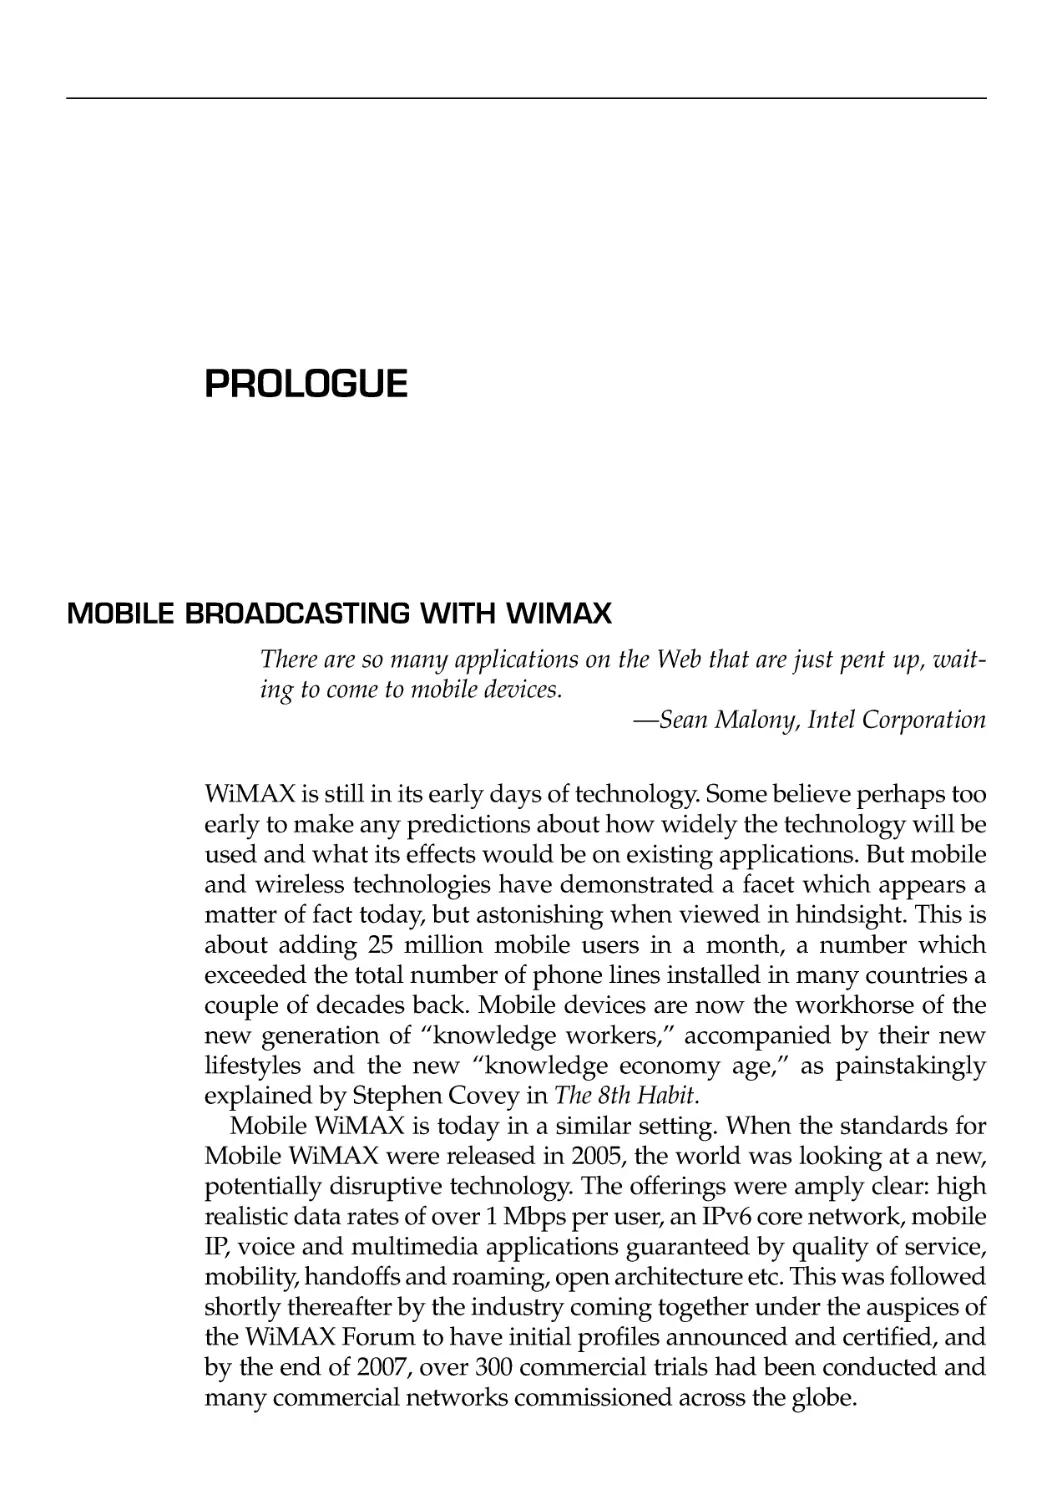 Prologue
MOBILE BROADCASTING WITH WIMAX